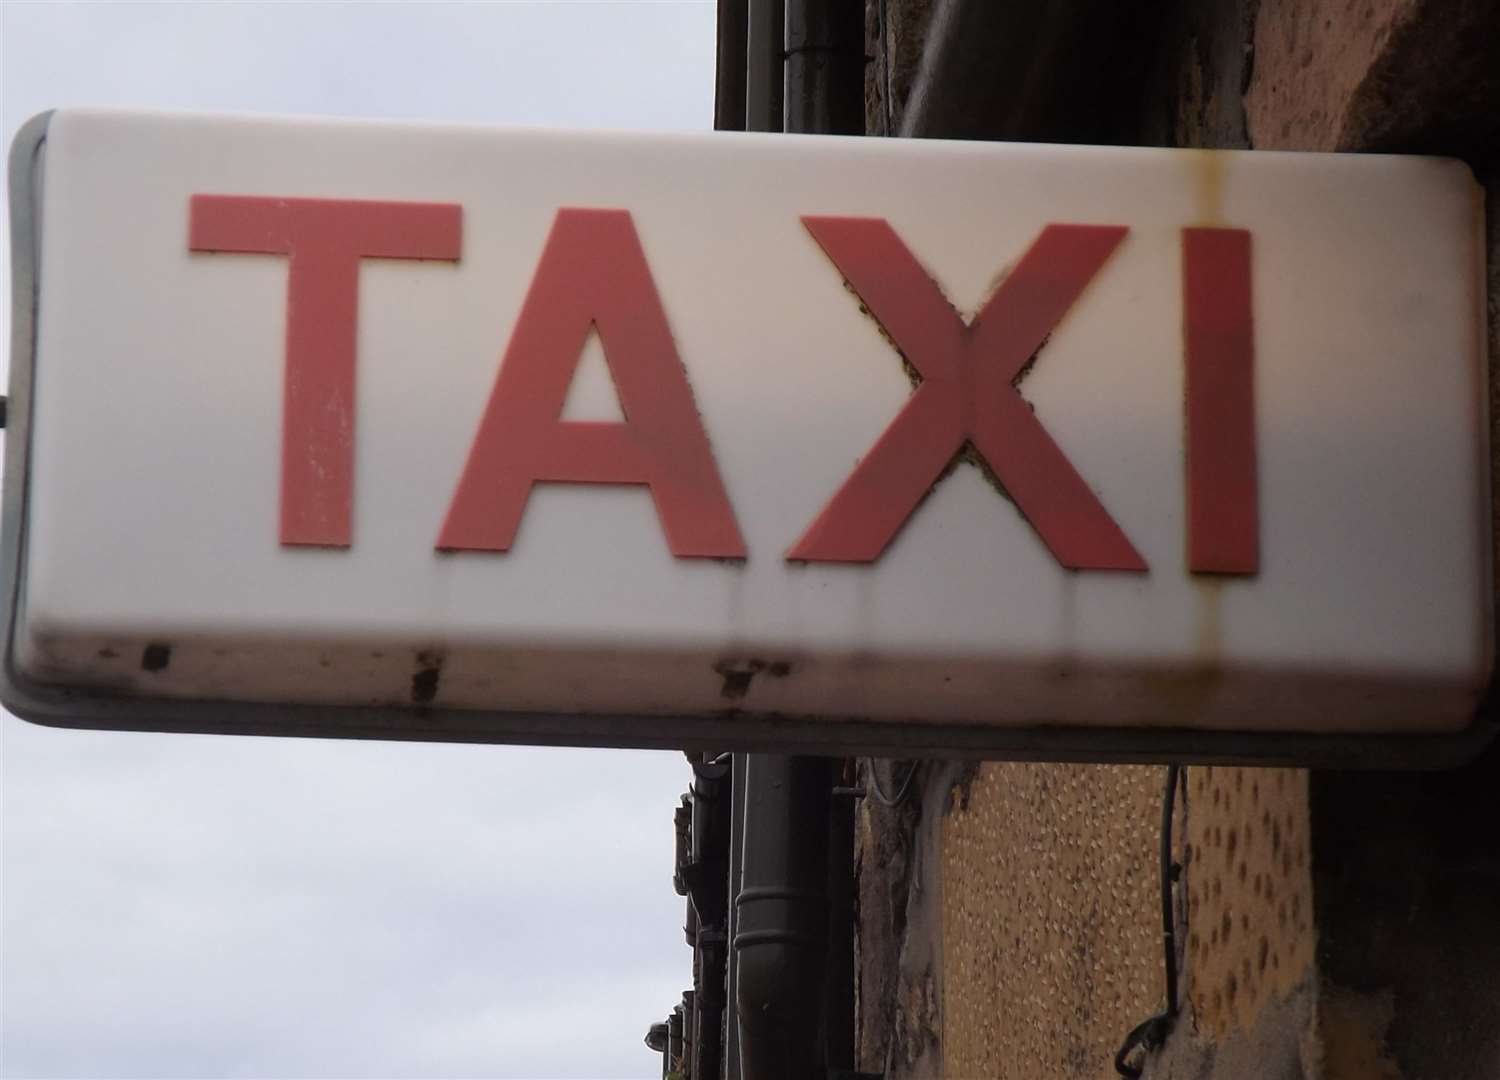 Inflation has hit taxis hard through rising fuel costs and repairs hindering firms ability to retain staff.